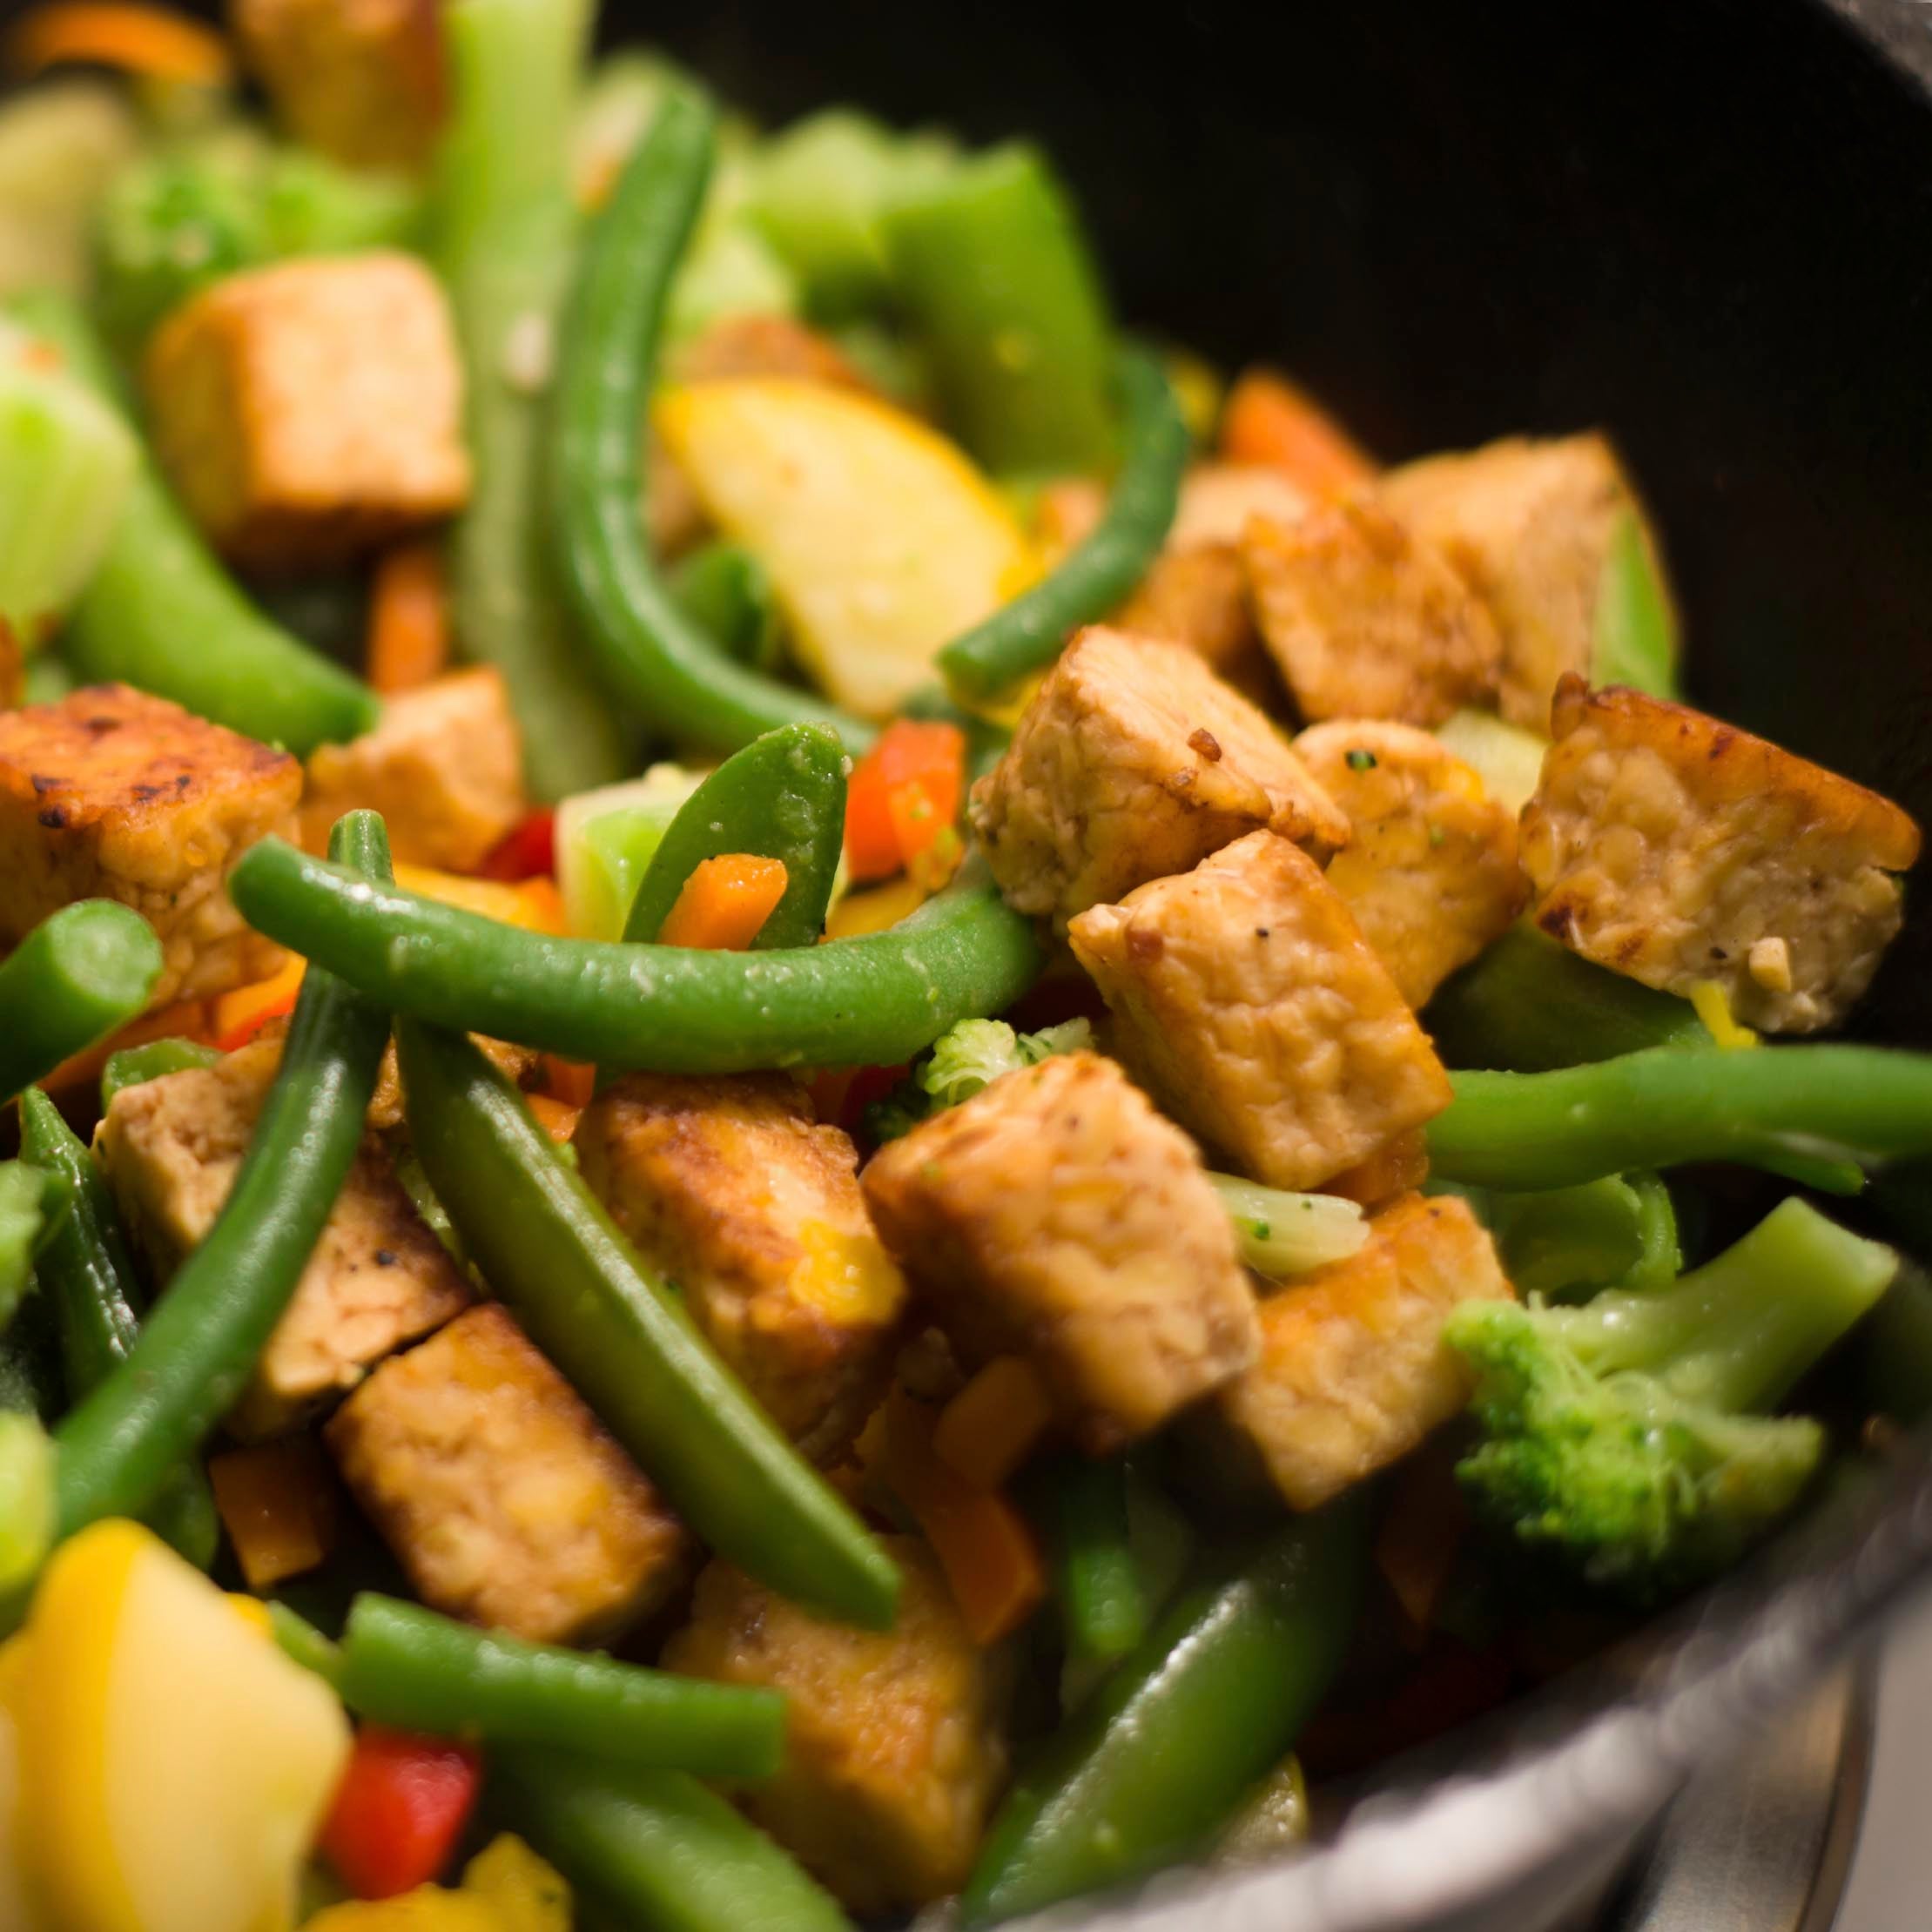 Tempeh stir fry with string beans, broccoli and yellow squash